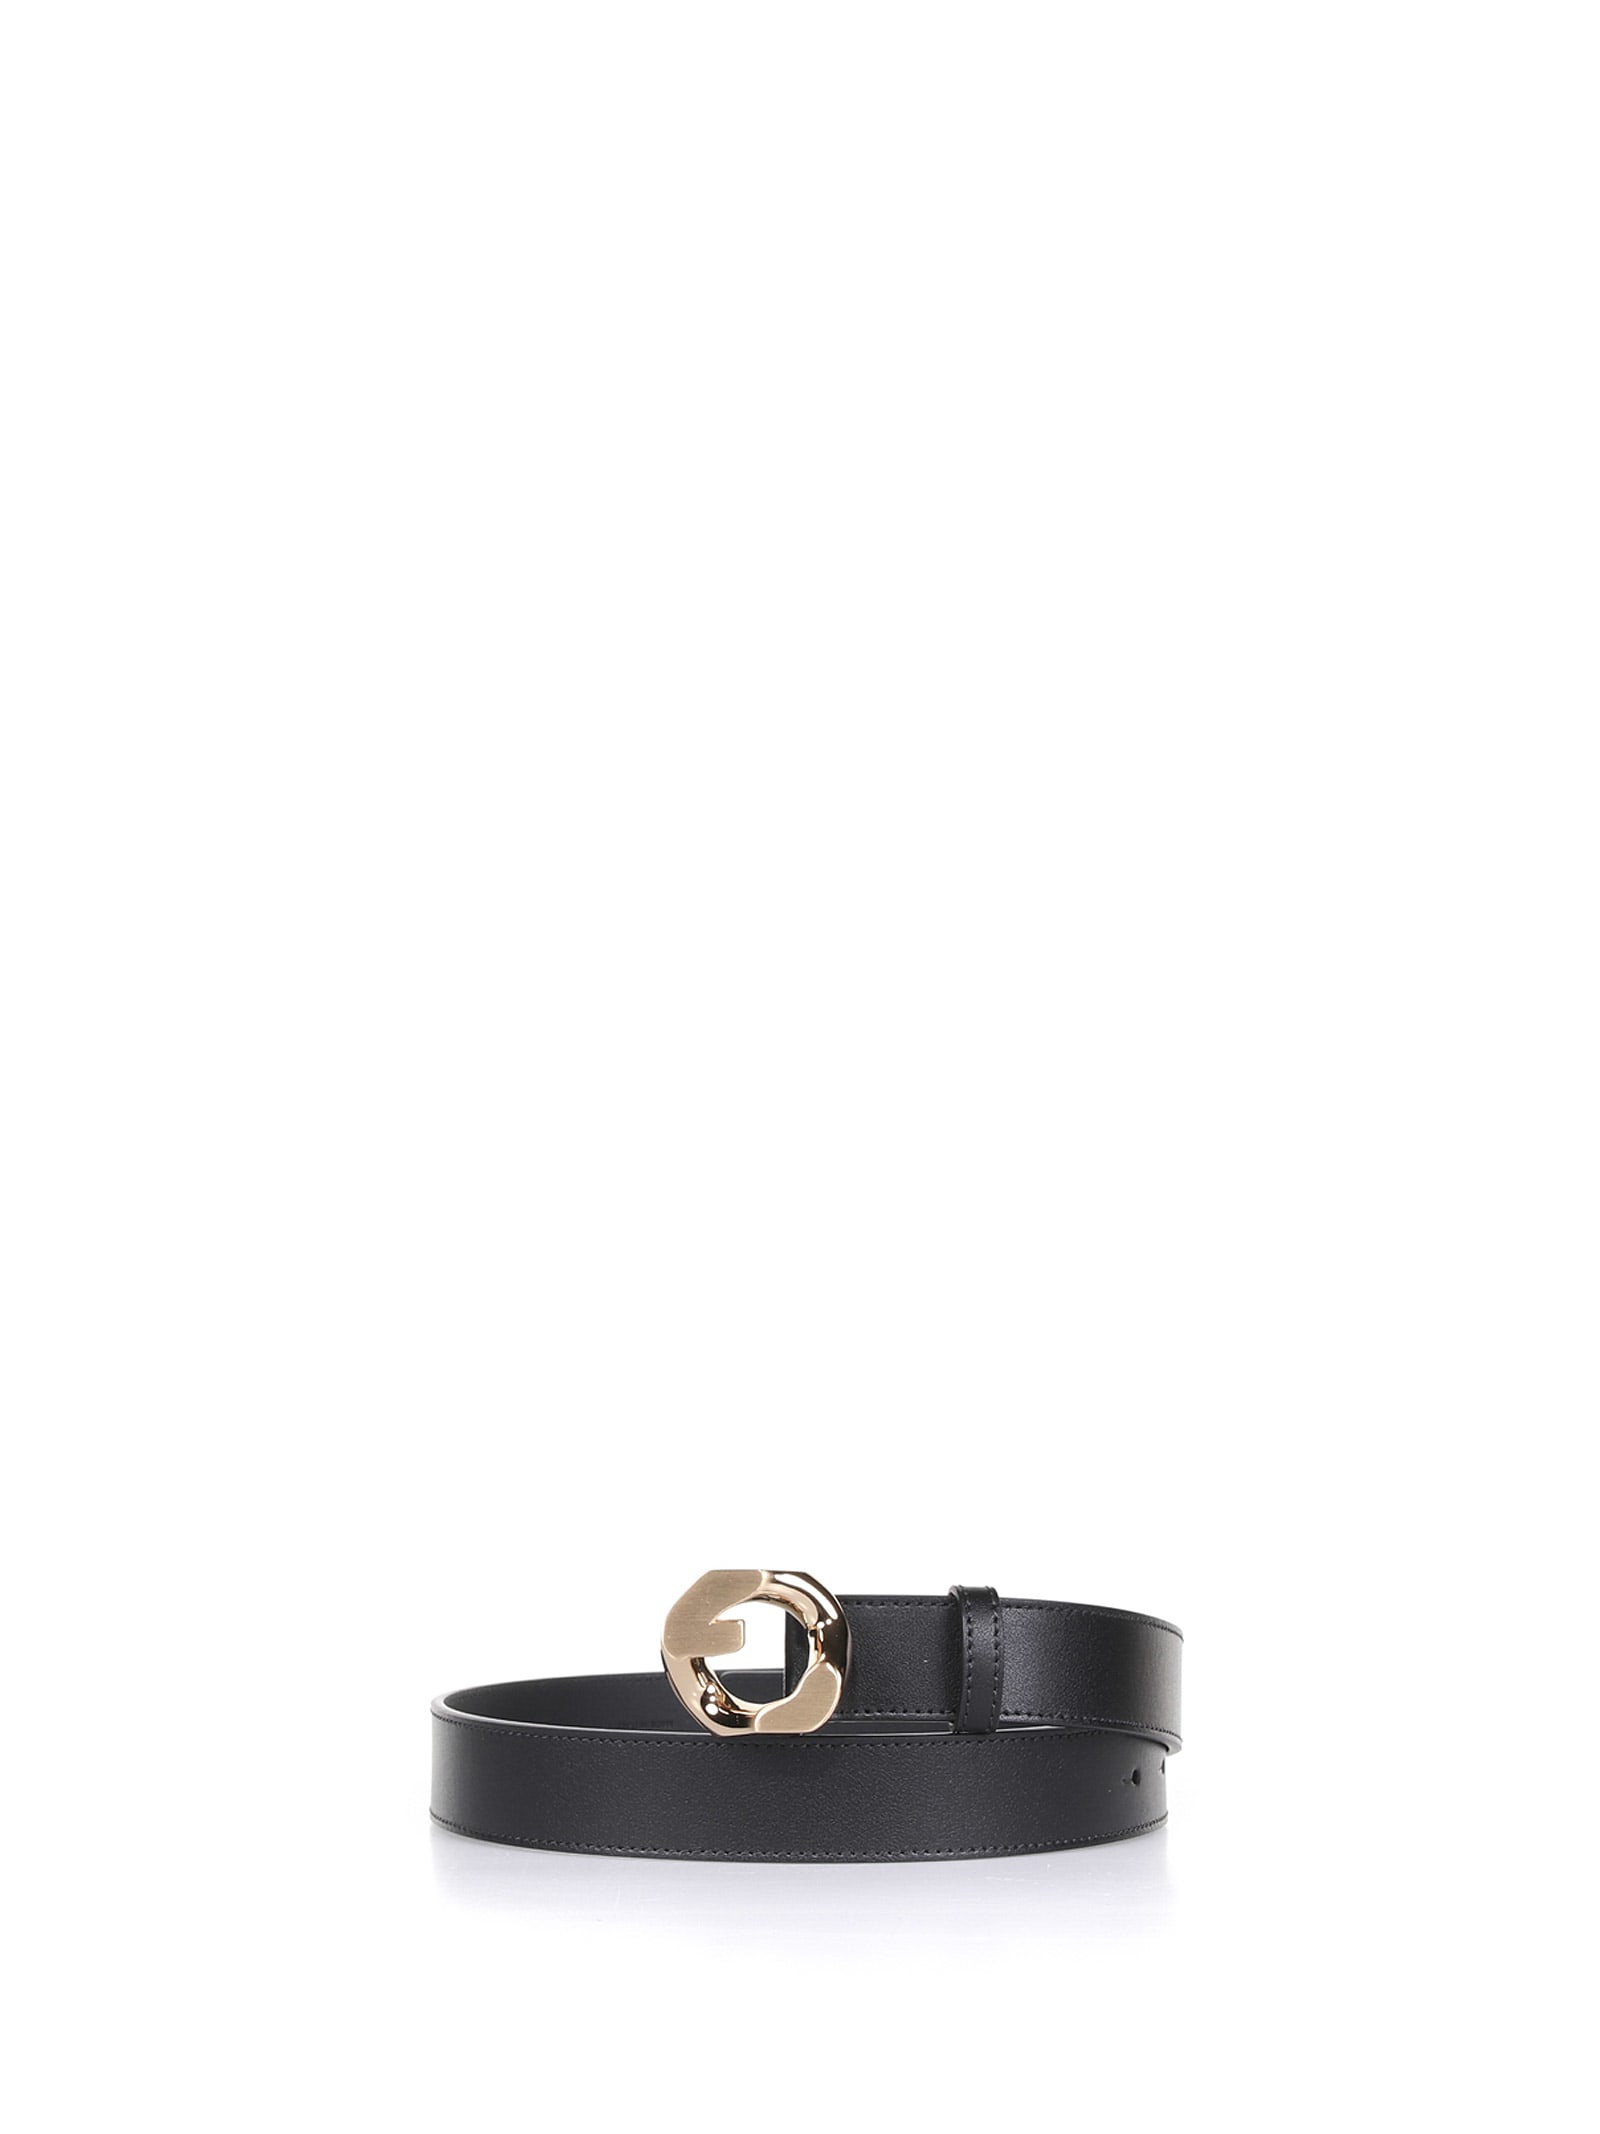 Givenchy Belt In Black Leather